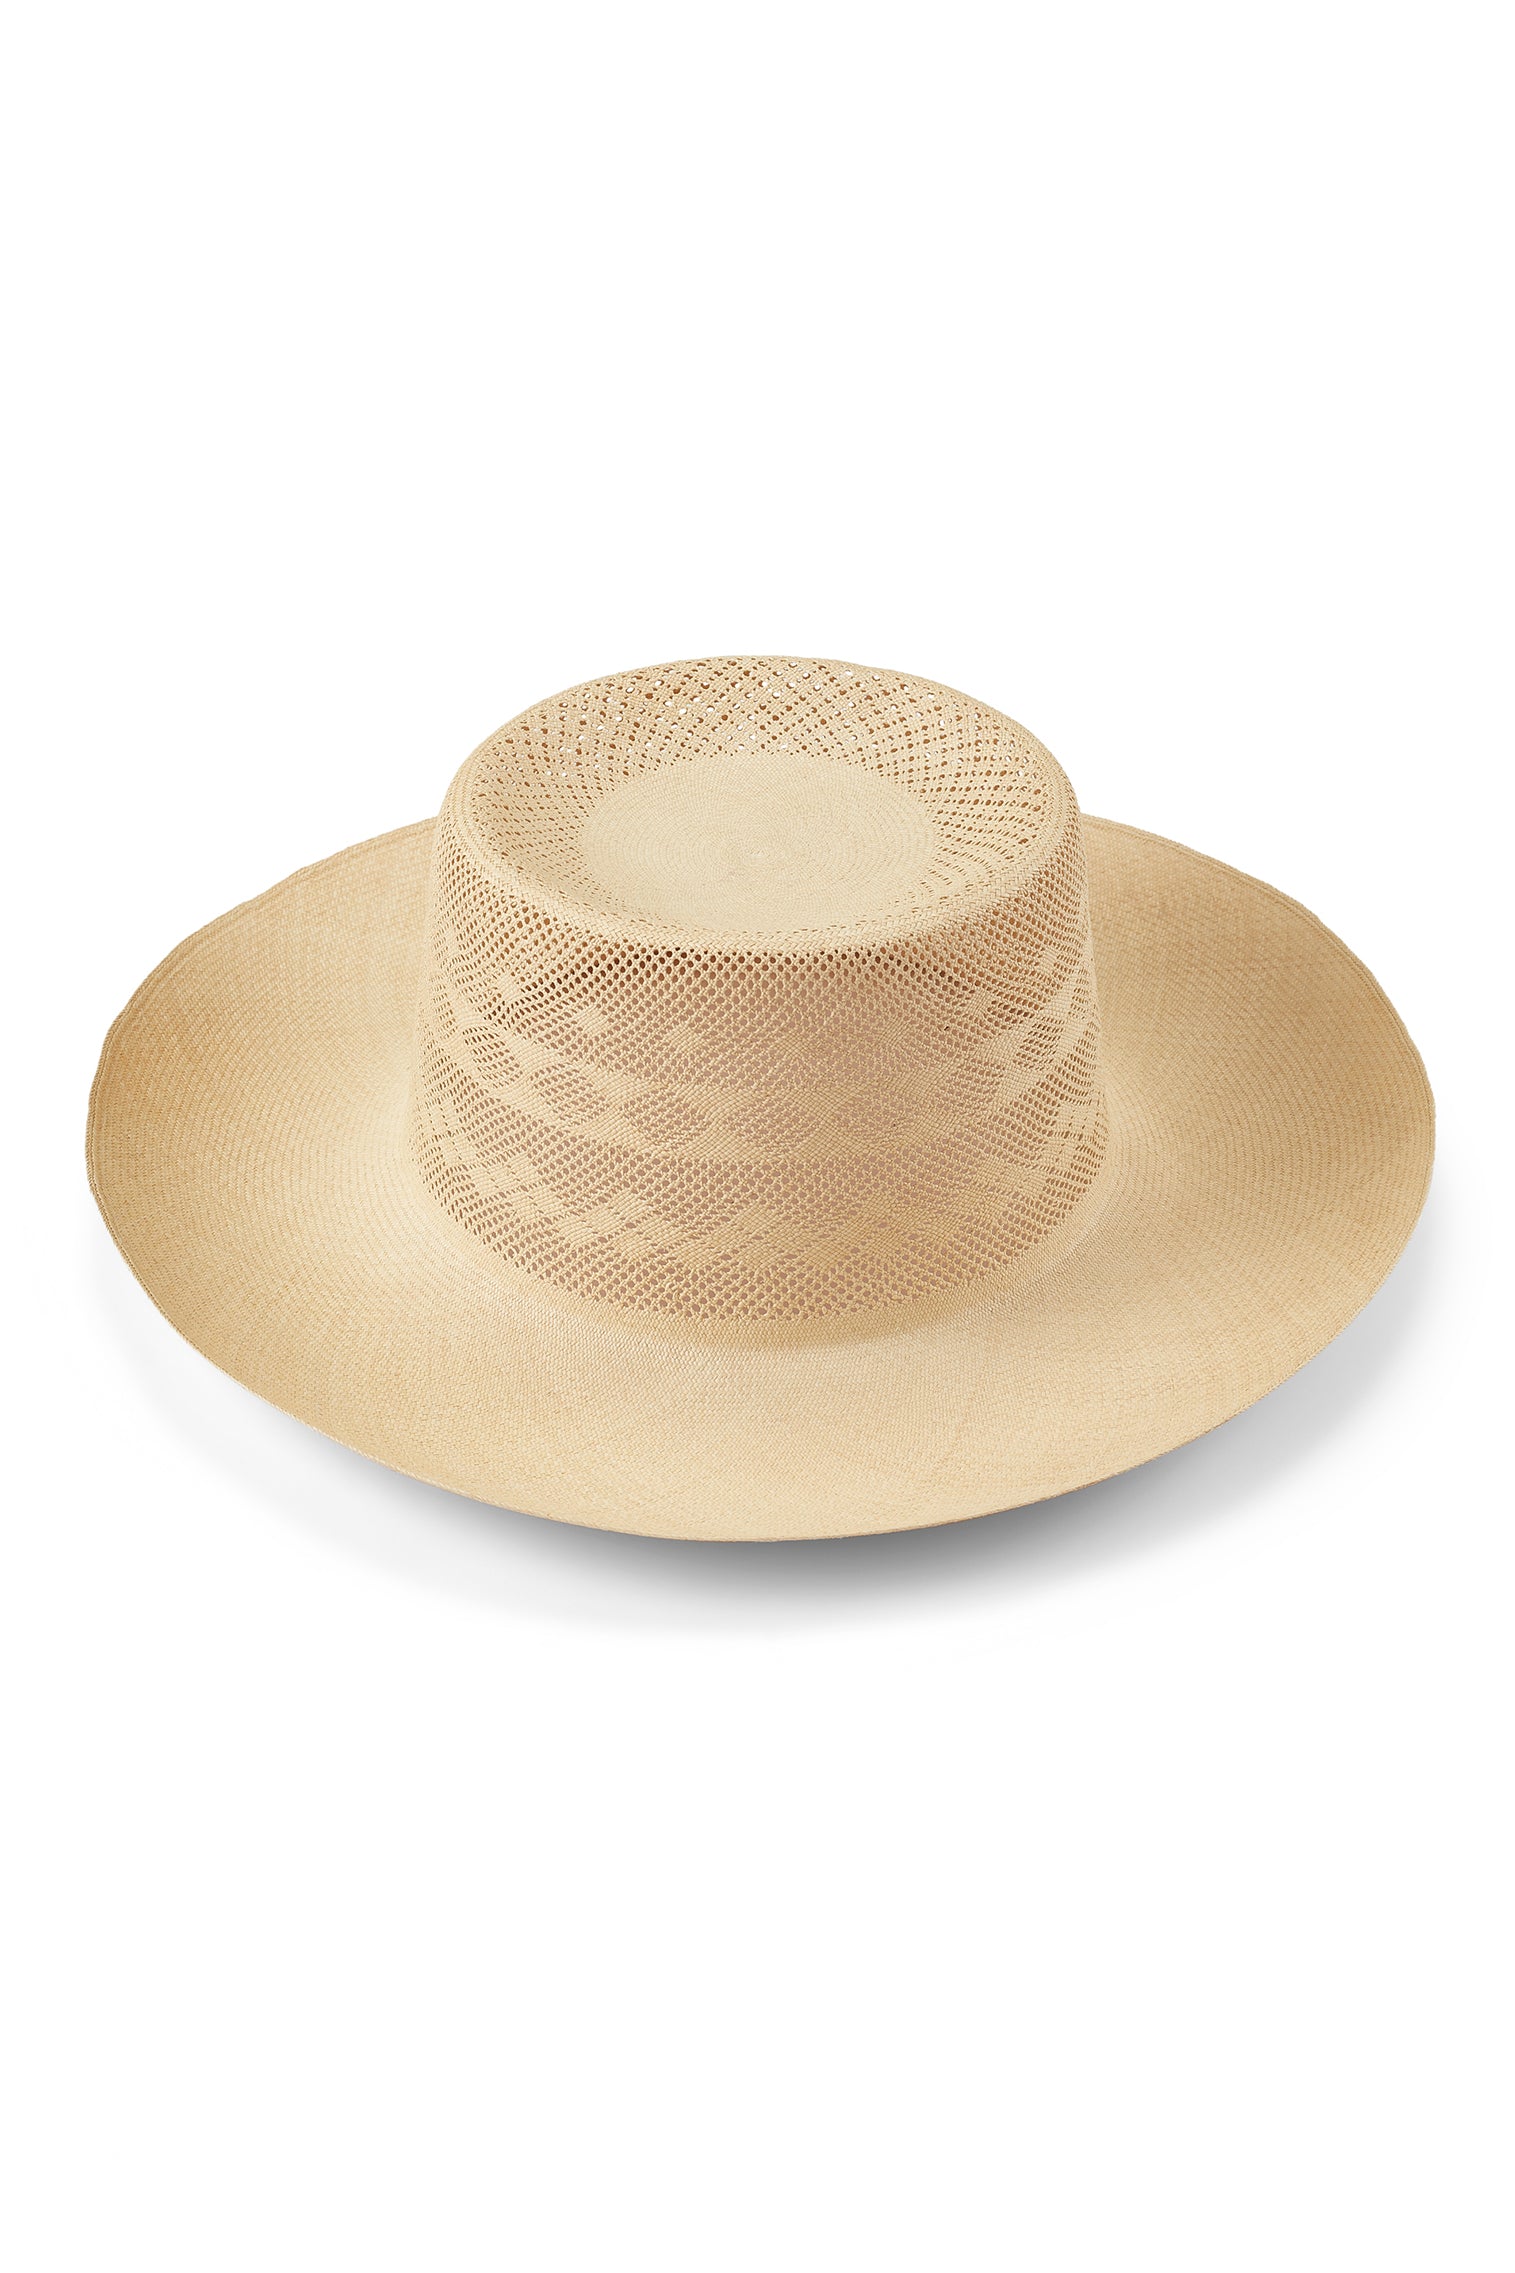 Eve Woven Panama - The Bespoke Embroidered Panama Hat Collection - Lock & Co. Hatters London UK